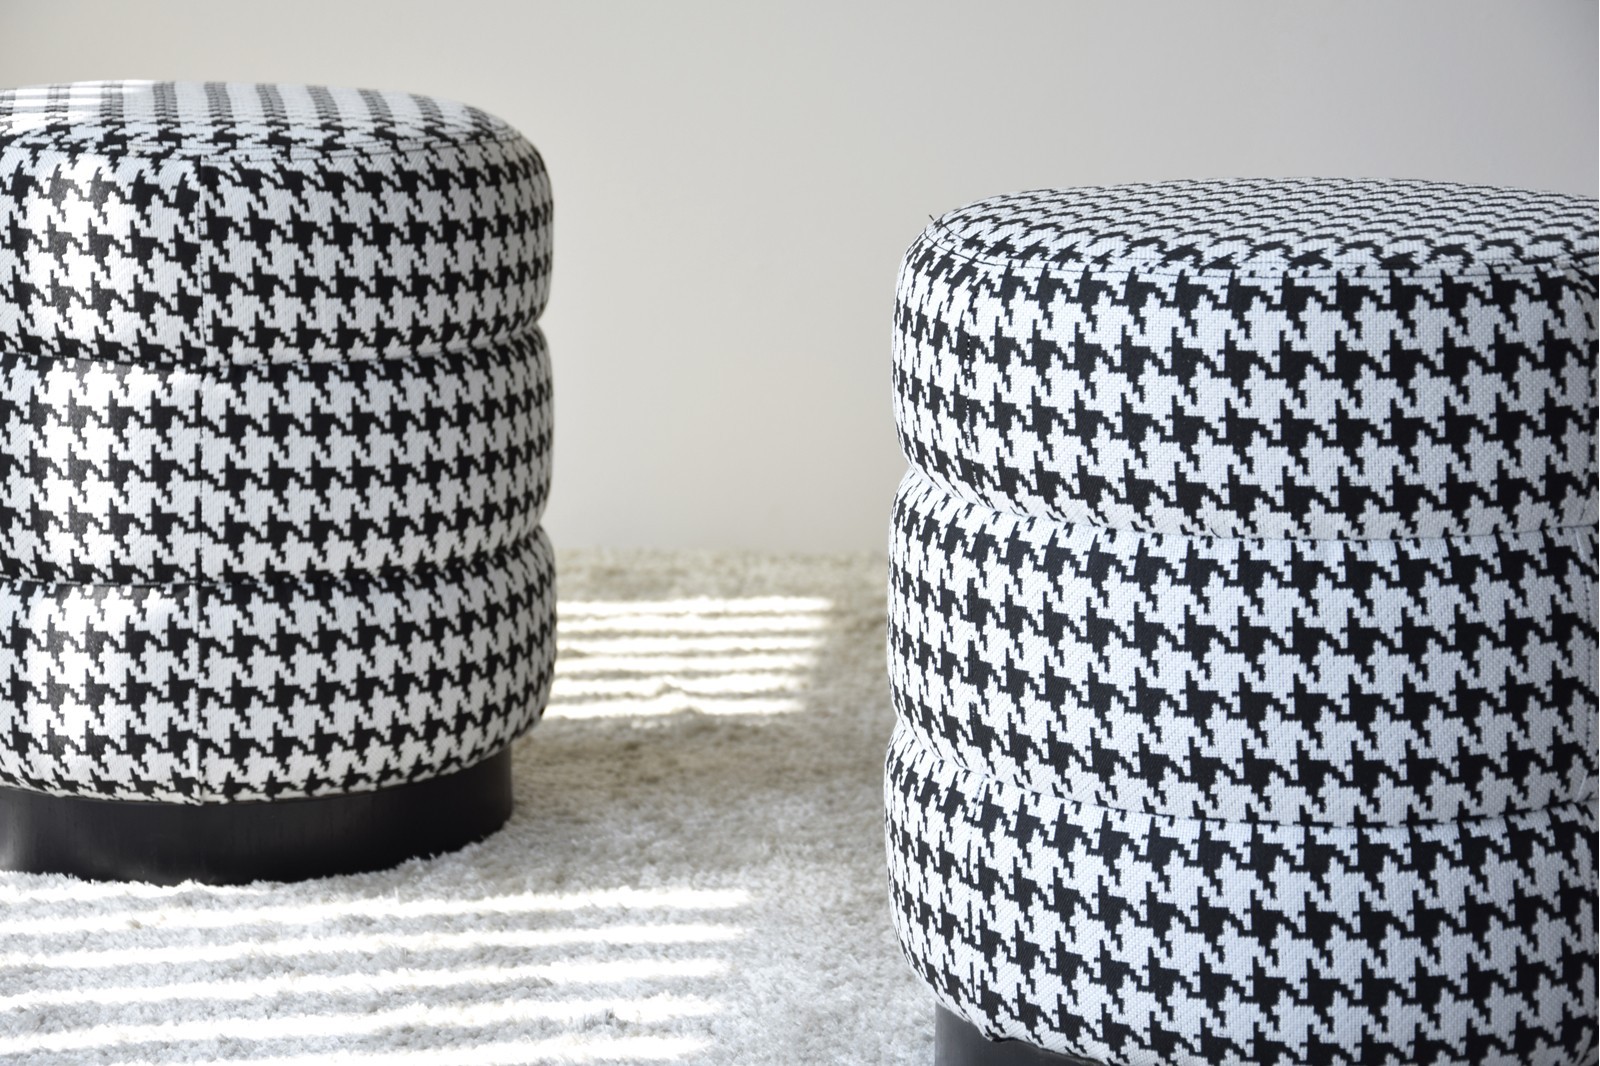 SET 2 STOOLS. HOUNDSTOOTH FABRIC.BLACK AND WHITE